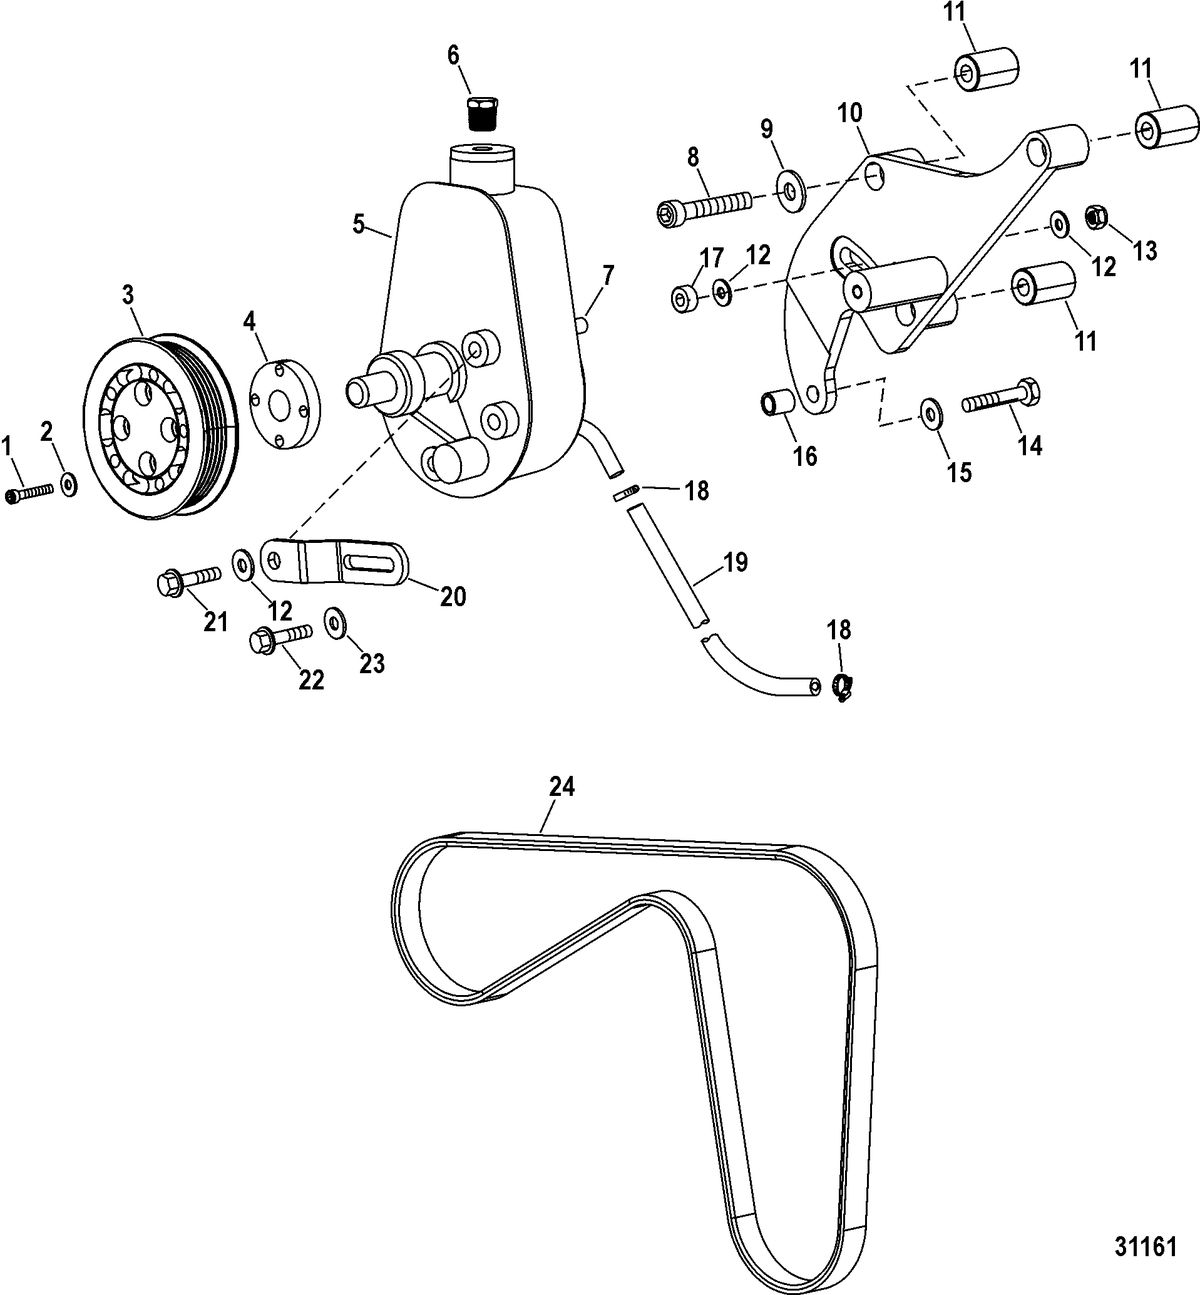 RACE STERNDRIVE 1075 SCI Power-Assisted Steering Components(Design II)